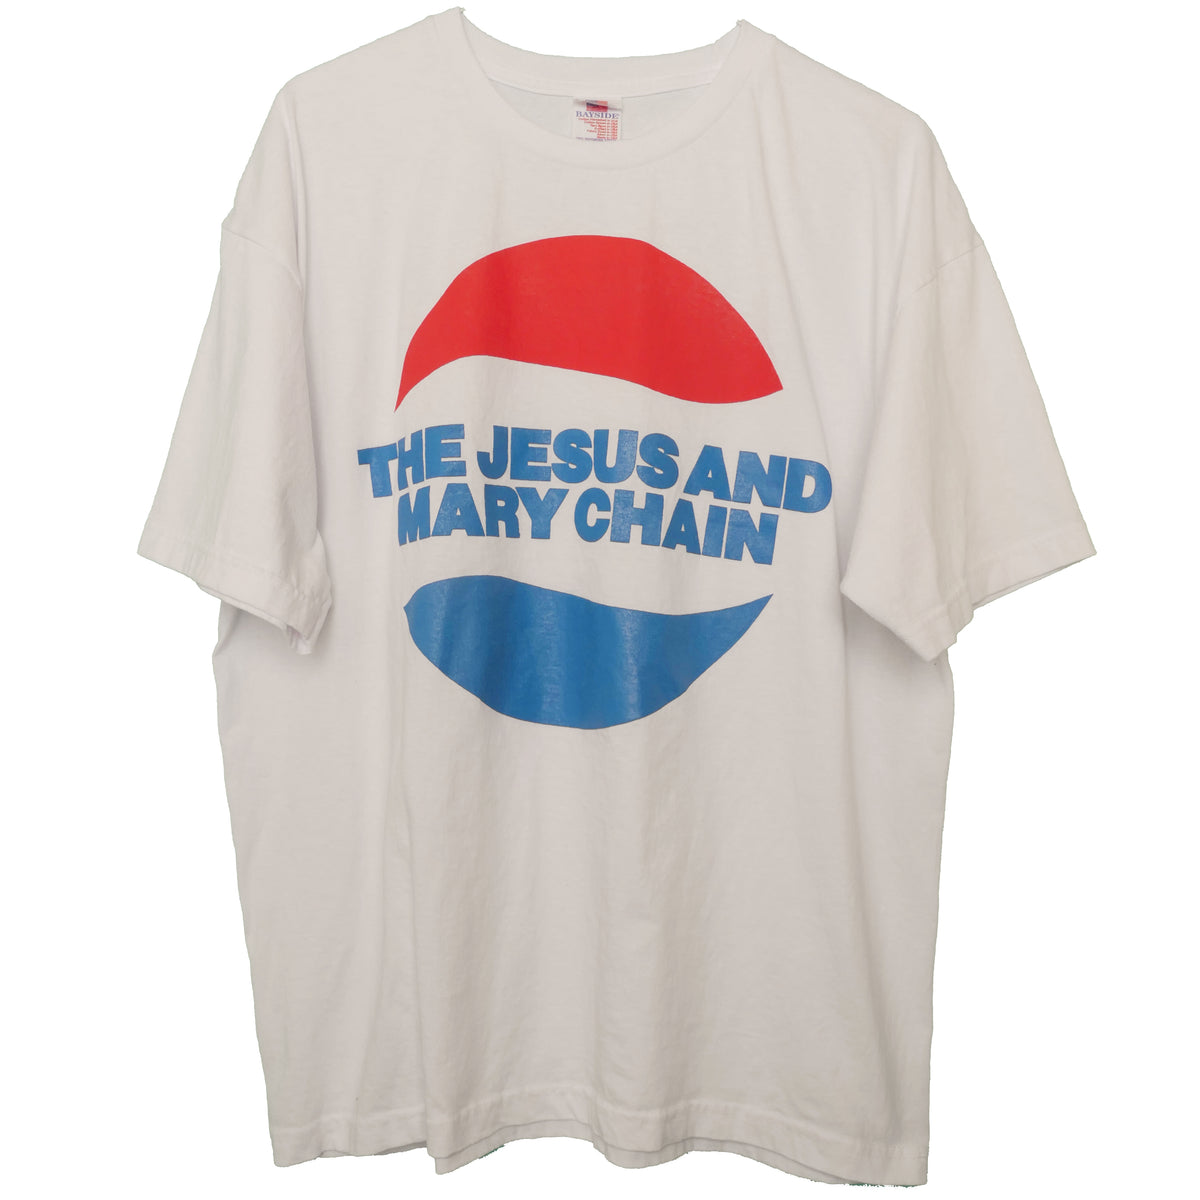 The Jesus And Mary Chain Tee